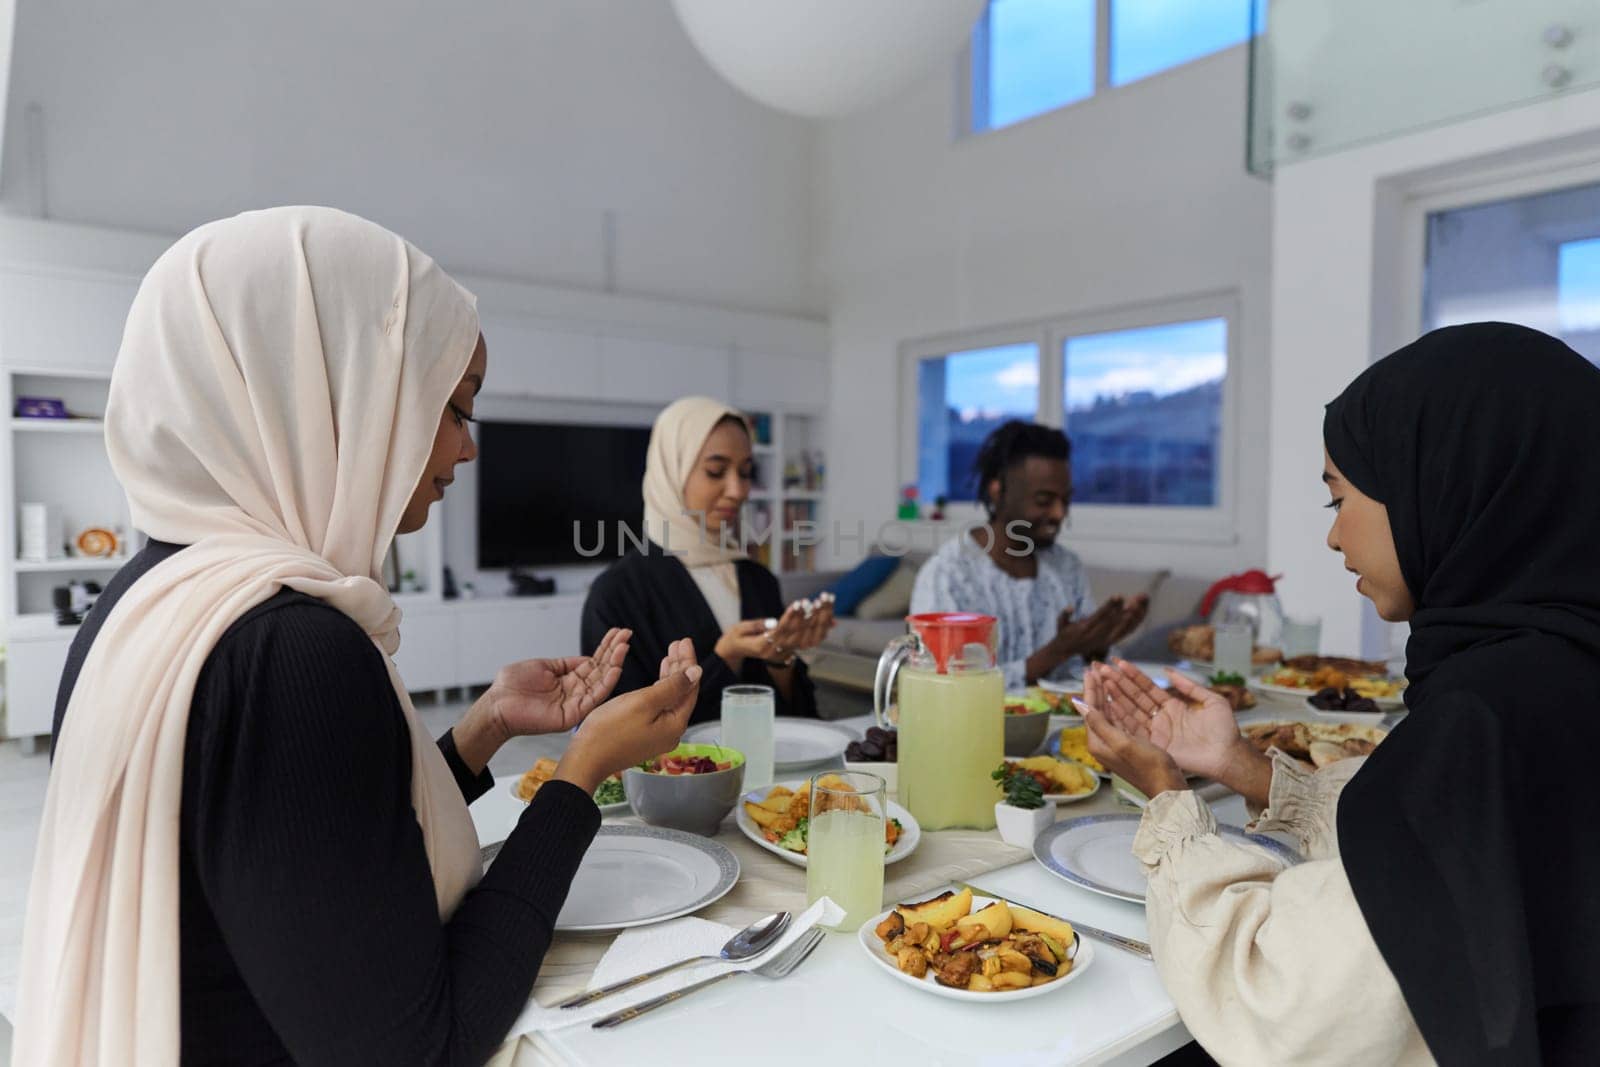 In the sacred month of Ramadan, a diverse Muslim family comes together in spiritual unity, fervently praying to God before breaking their fast, capturing a moment of collective devotion, cultural diversity, and familial joy in the midst of the holy celebration.